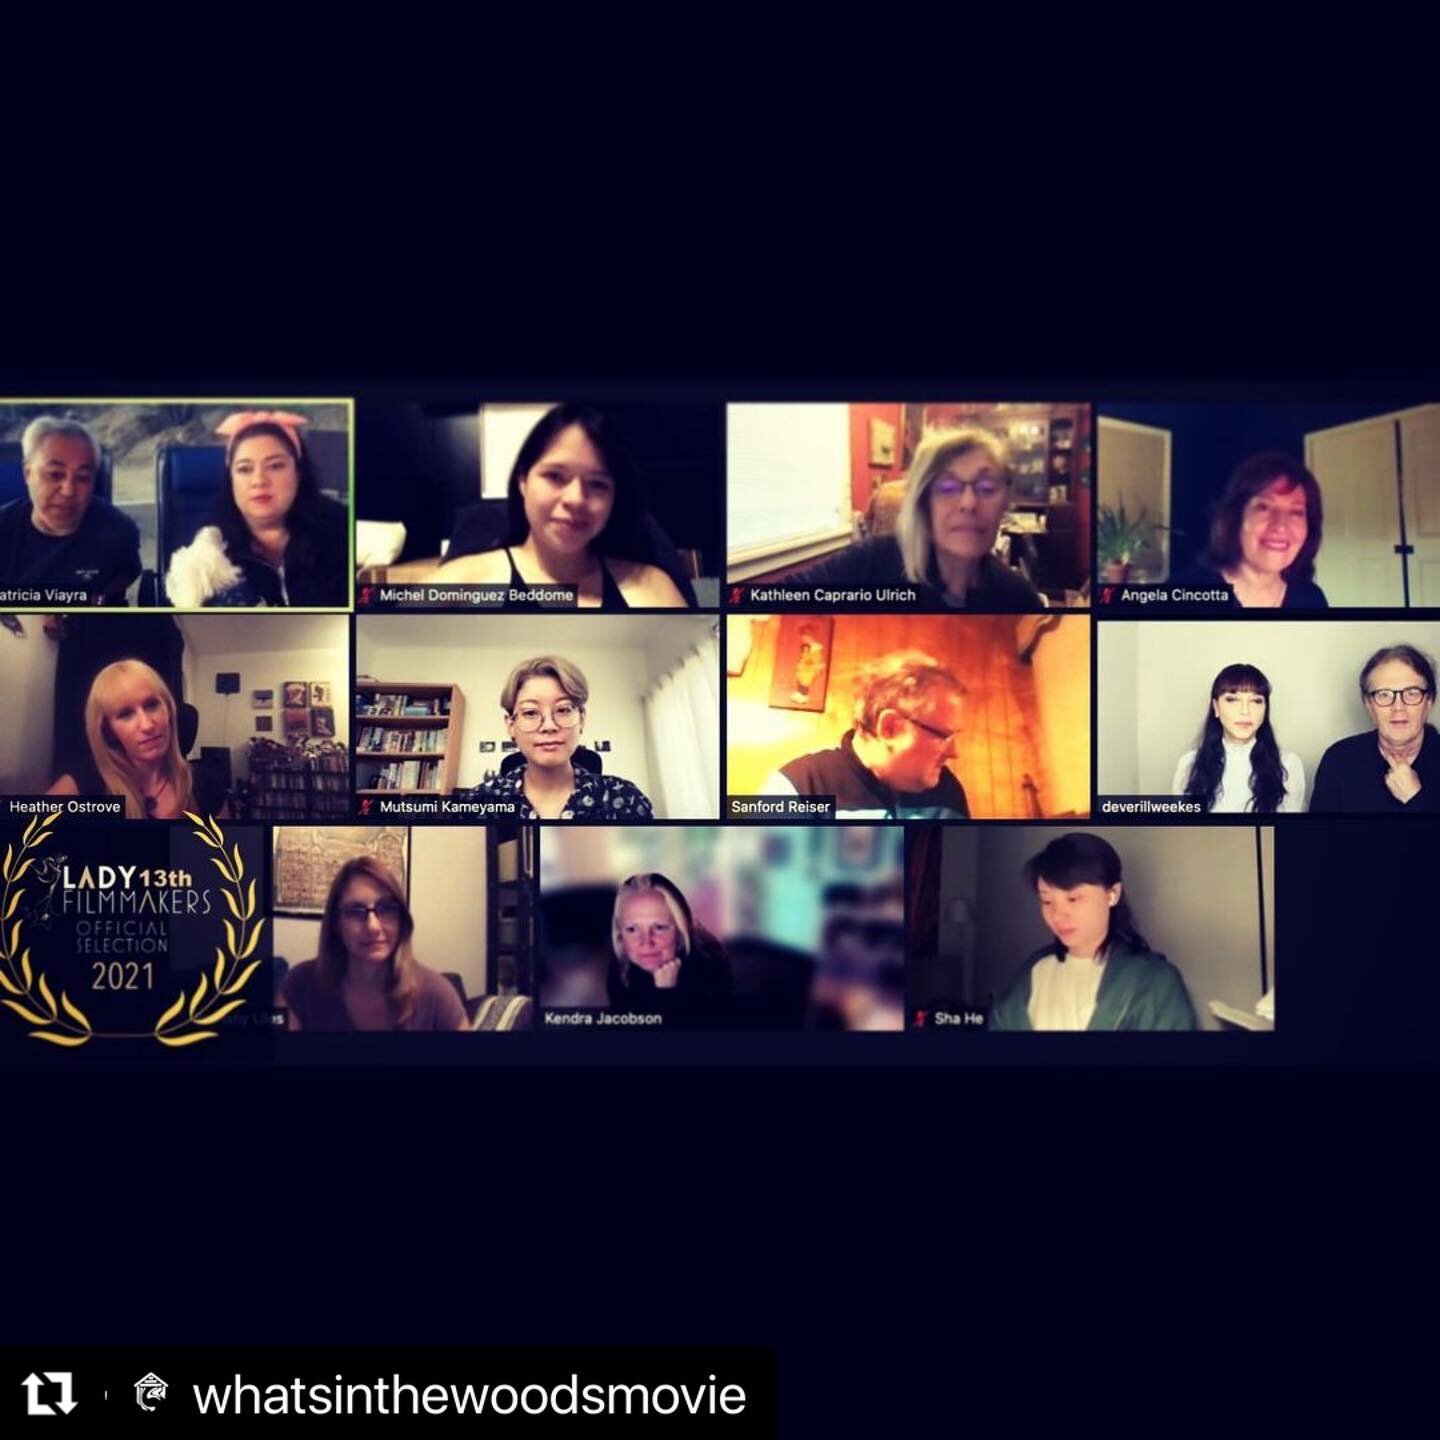 #Repost @whatsinthewoodsmovie with @make_repost
・・・
#happyfemalefilmmakerfriday !! 

We are absolutely obsessed with the @ladyfilmmakers community and we are so thankful that for the last couple of weeks we got to be a part of that. 

This is truly a